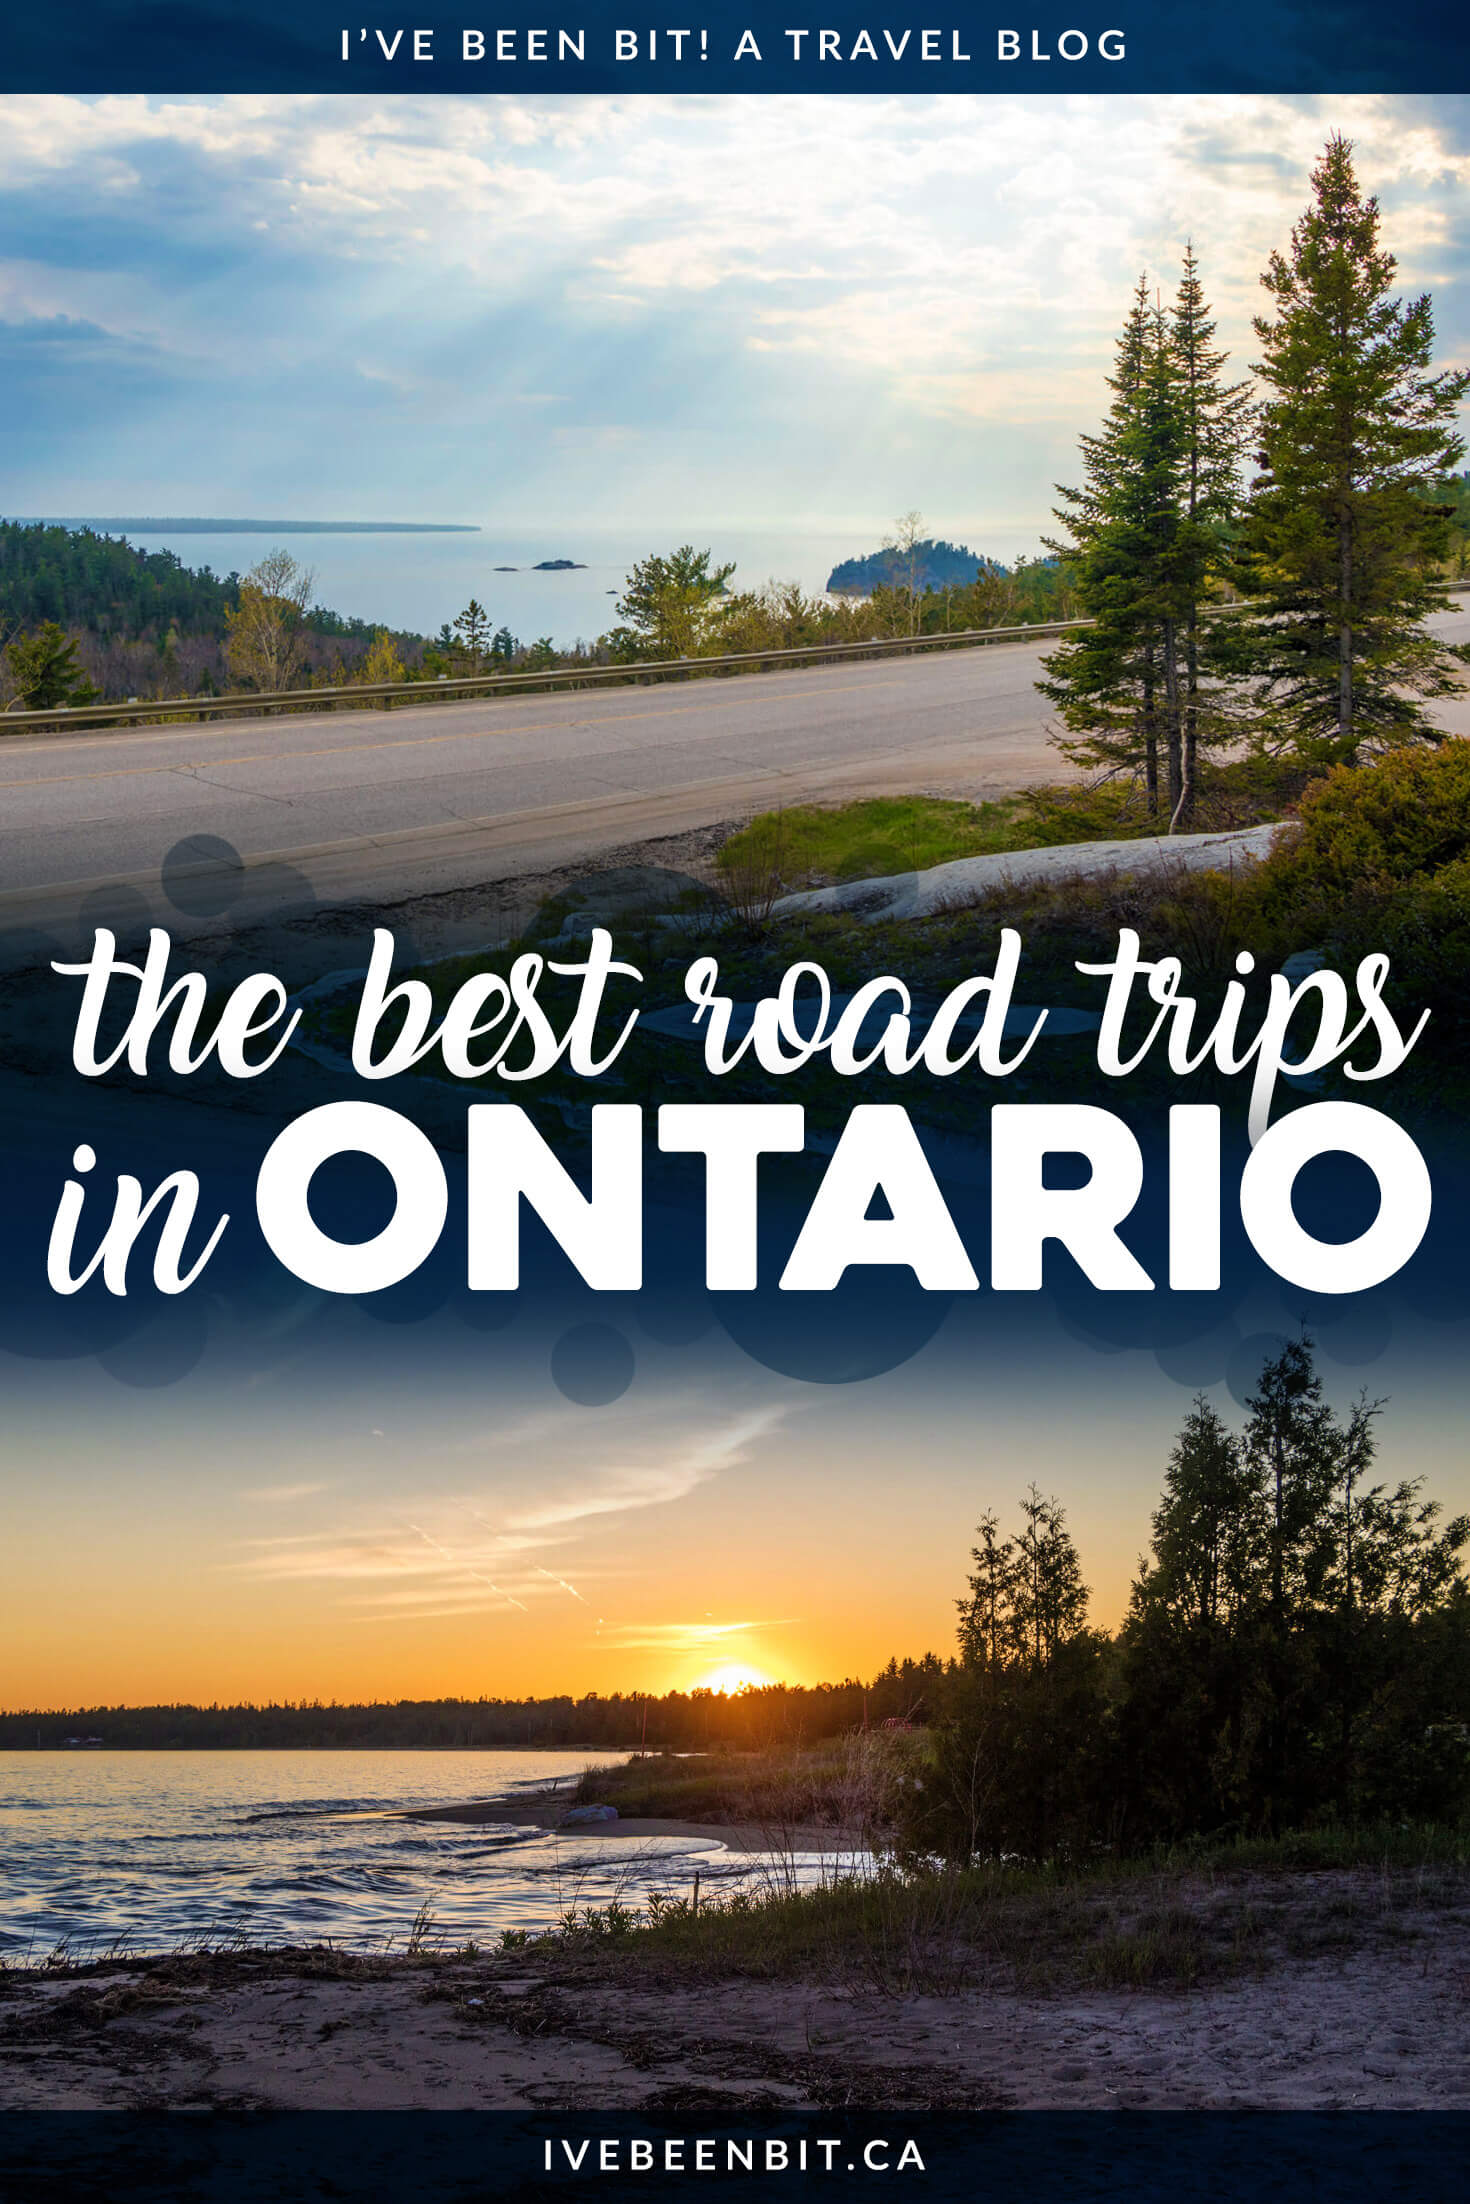 There are so many amazing places to go on a road trip in Ontario. Whether you're looking for day trips from Toronto, weekend adventures or longer excursions, these are the best Ontario road trips you have to experience! | #Travel #Canada #Ontario #RoadTrip #Toronto | IveBeenBit.ca